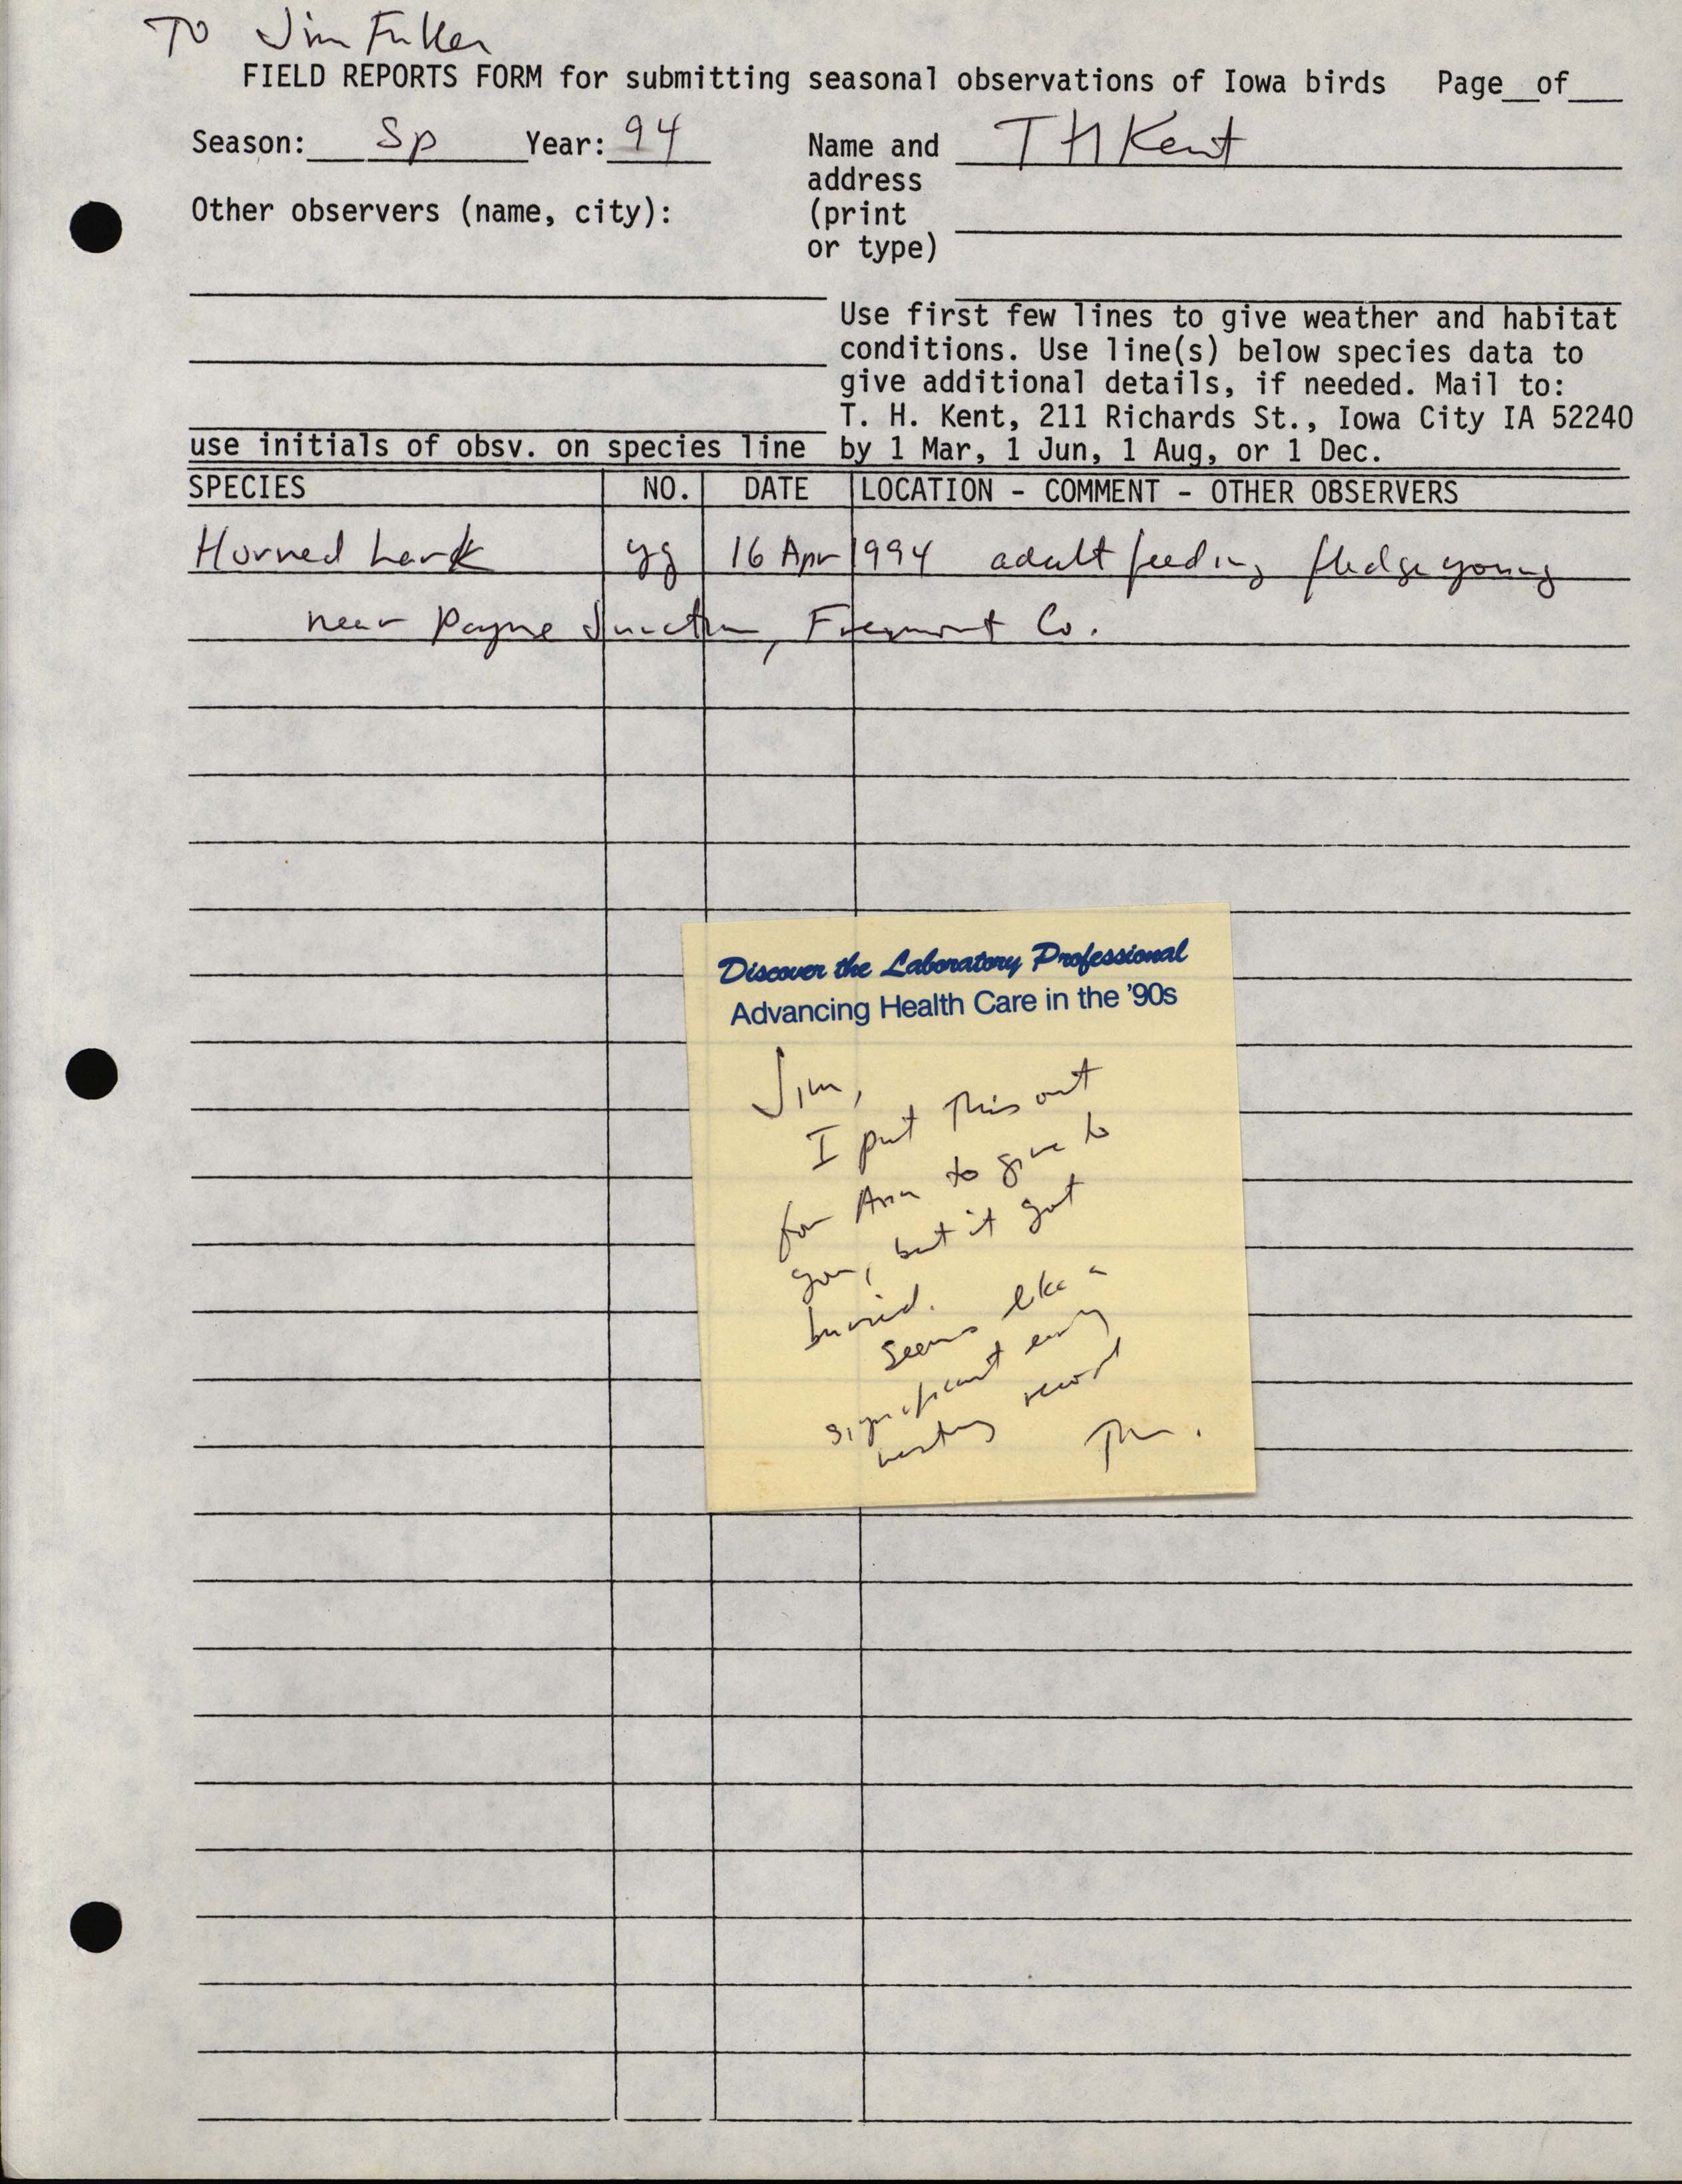 Field reports form for submitting seasonal observations of Iowa birds, Thomas Kent, Spring 1994